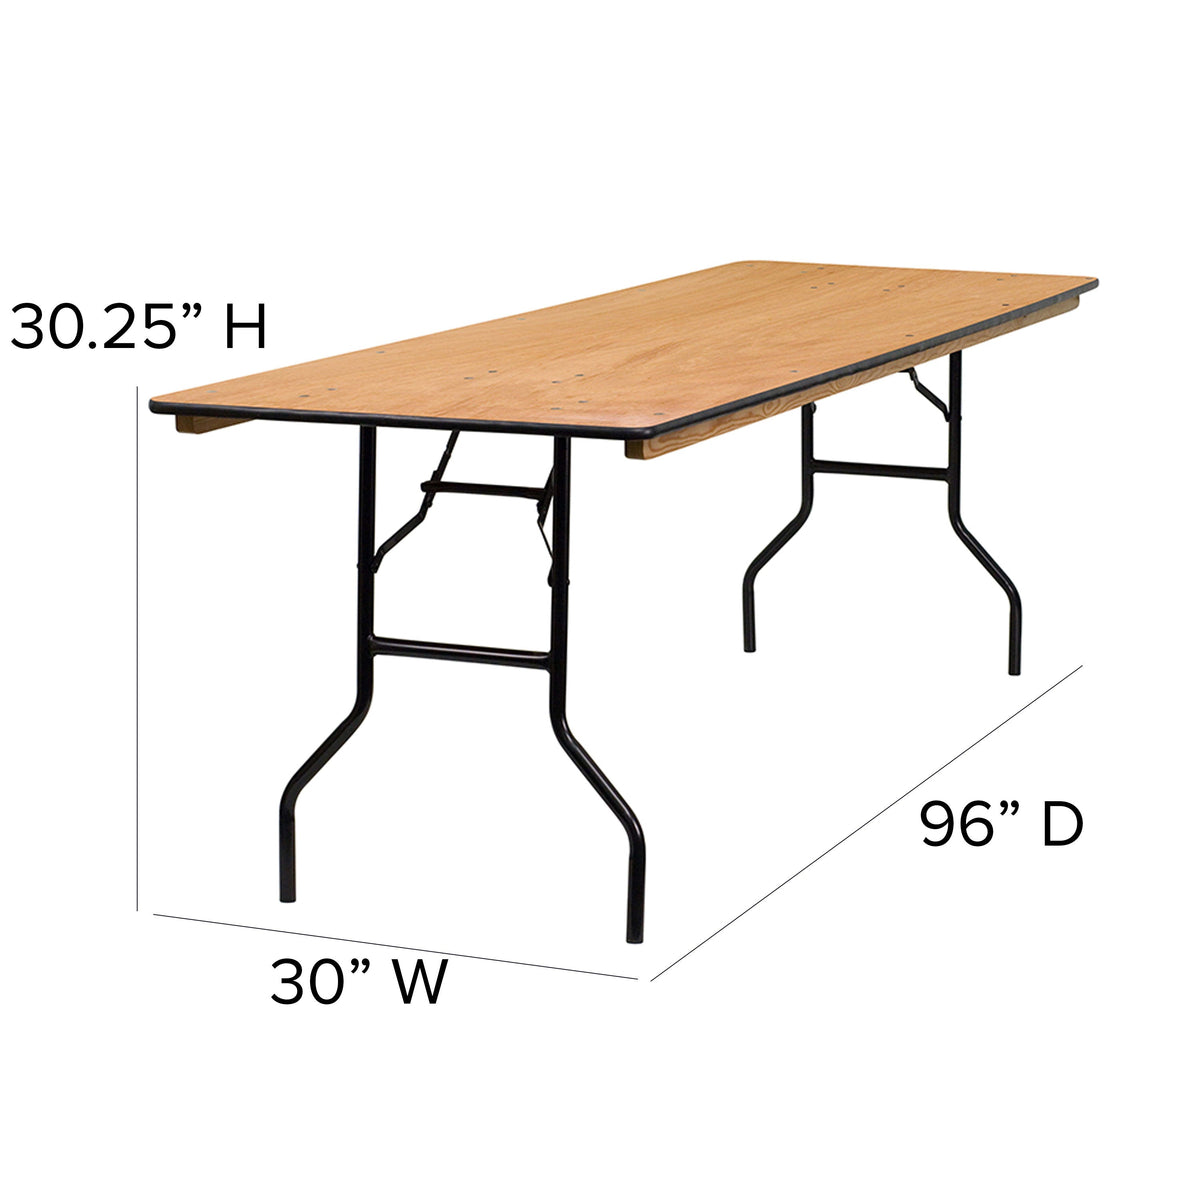 8-Foot Rectangular Wood Folding Banquet Table with Clear Coated Finished Top